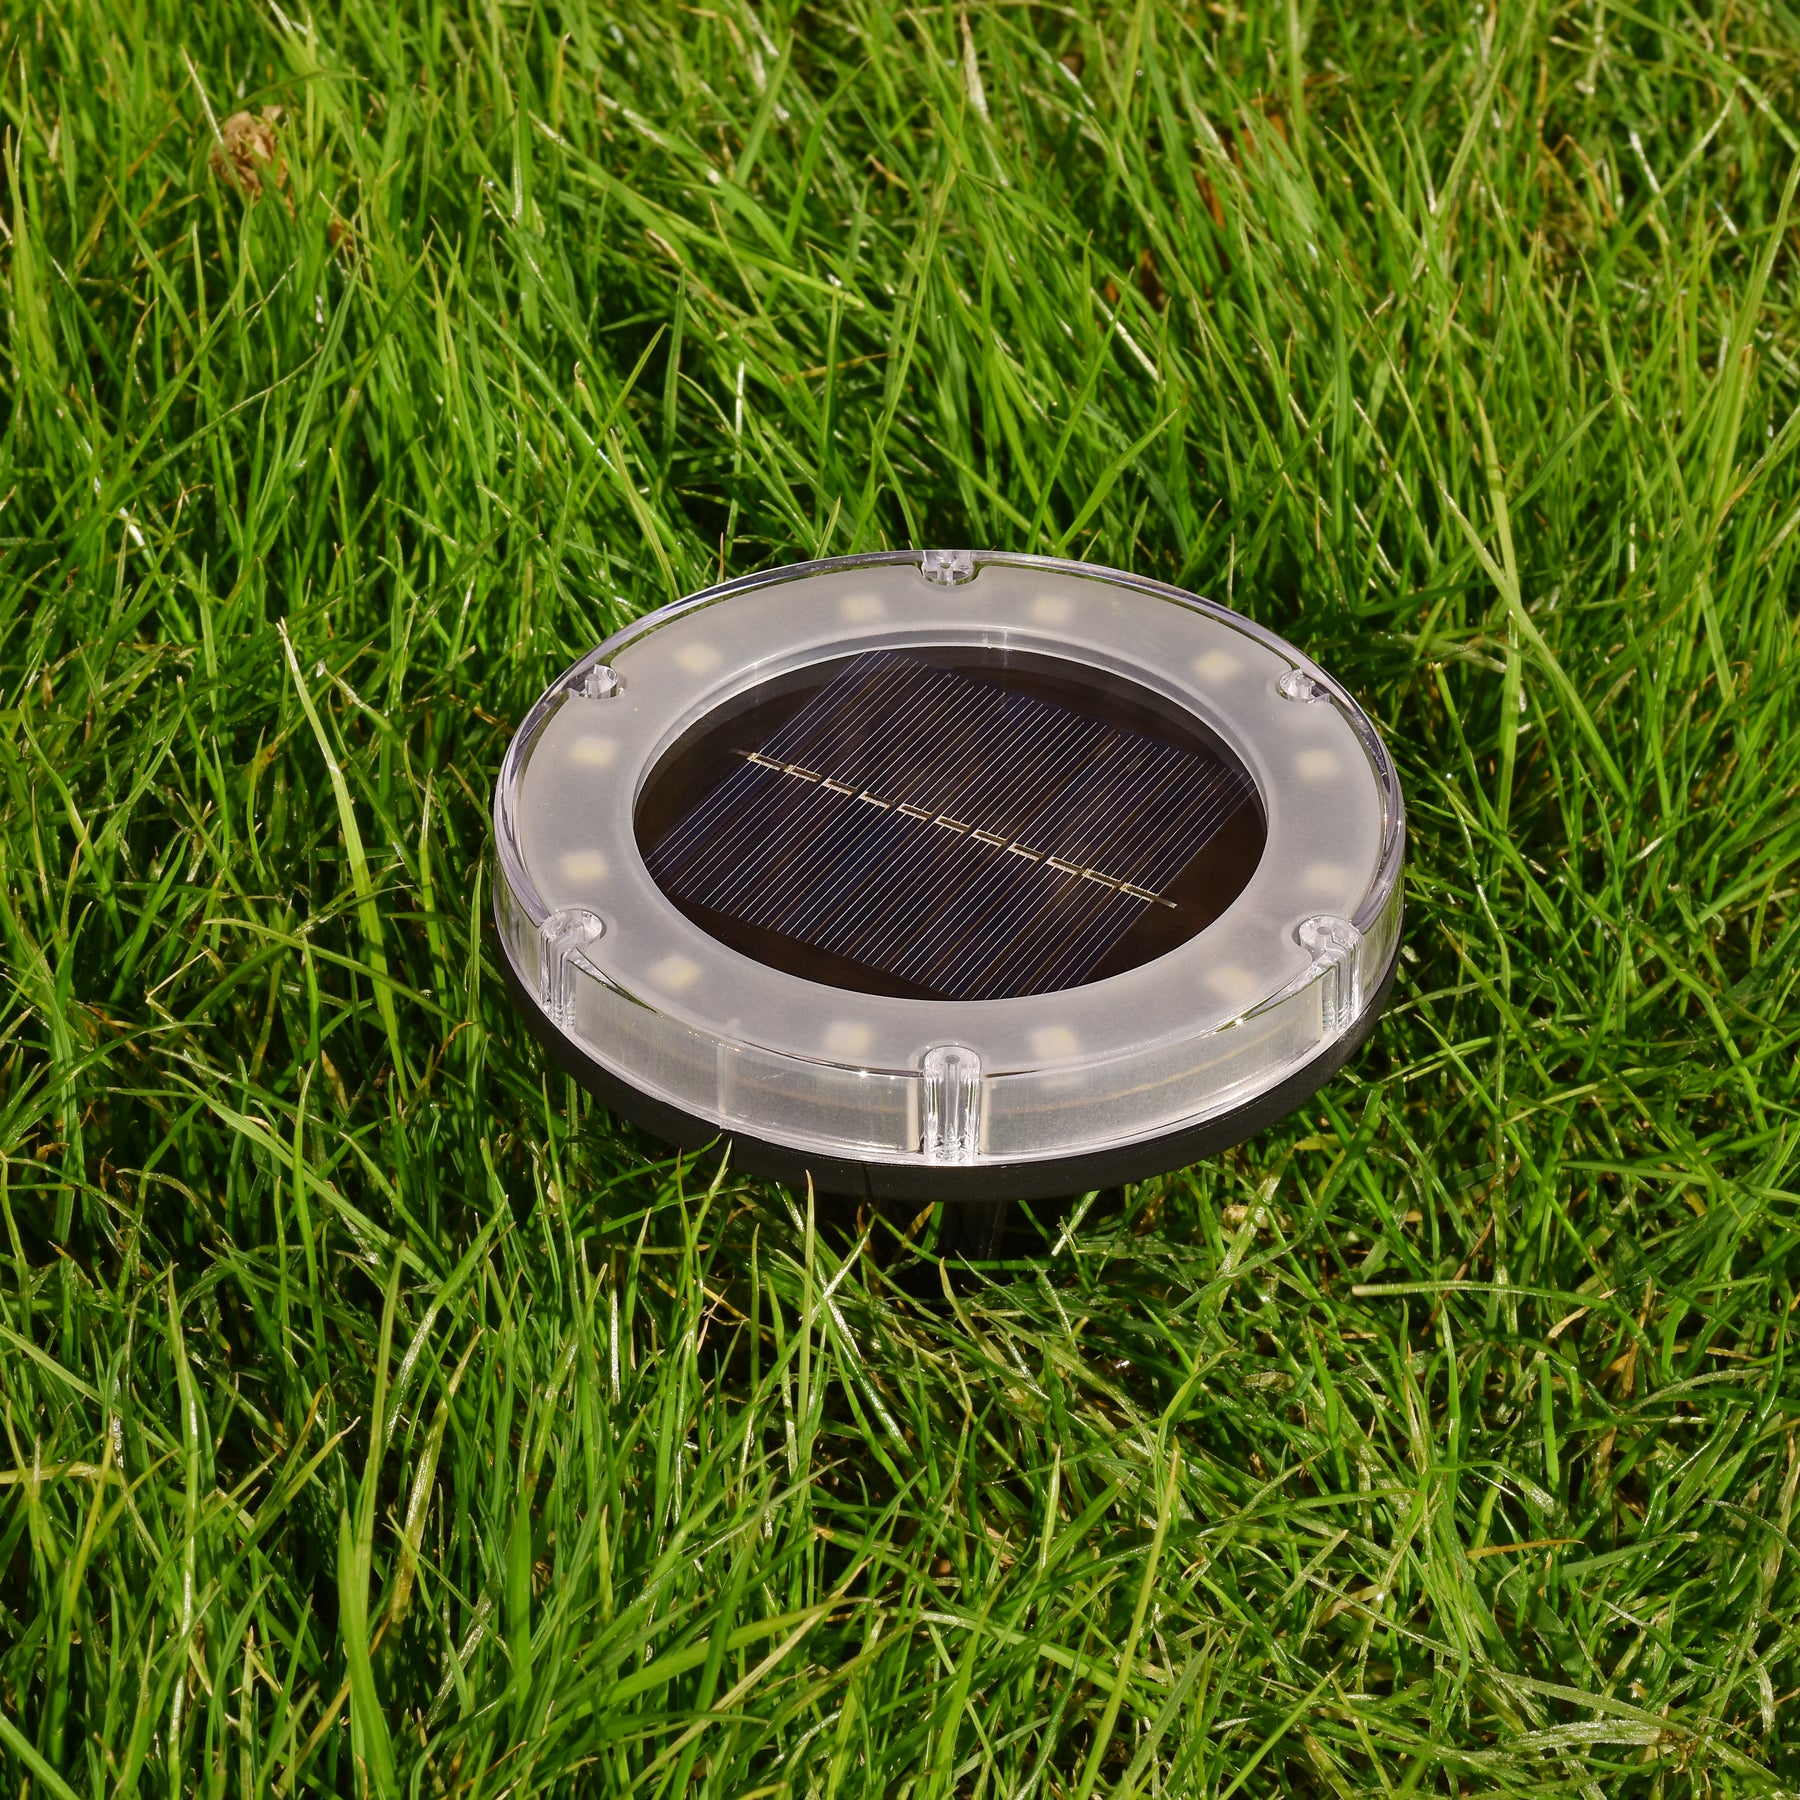 Bliss Outdoors Solar Powered Disc LED Pathway Light staked into the grass.